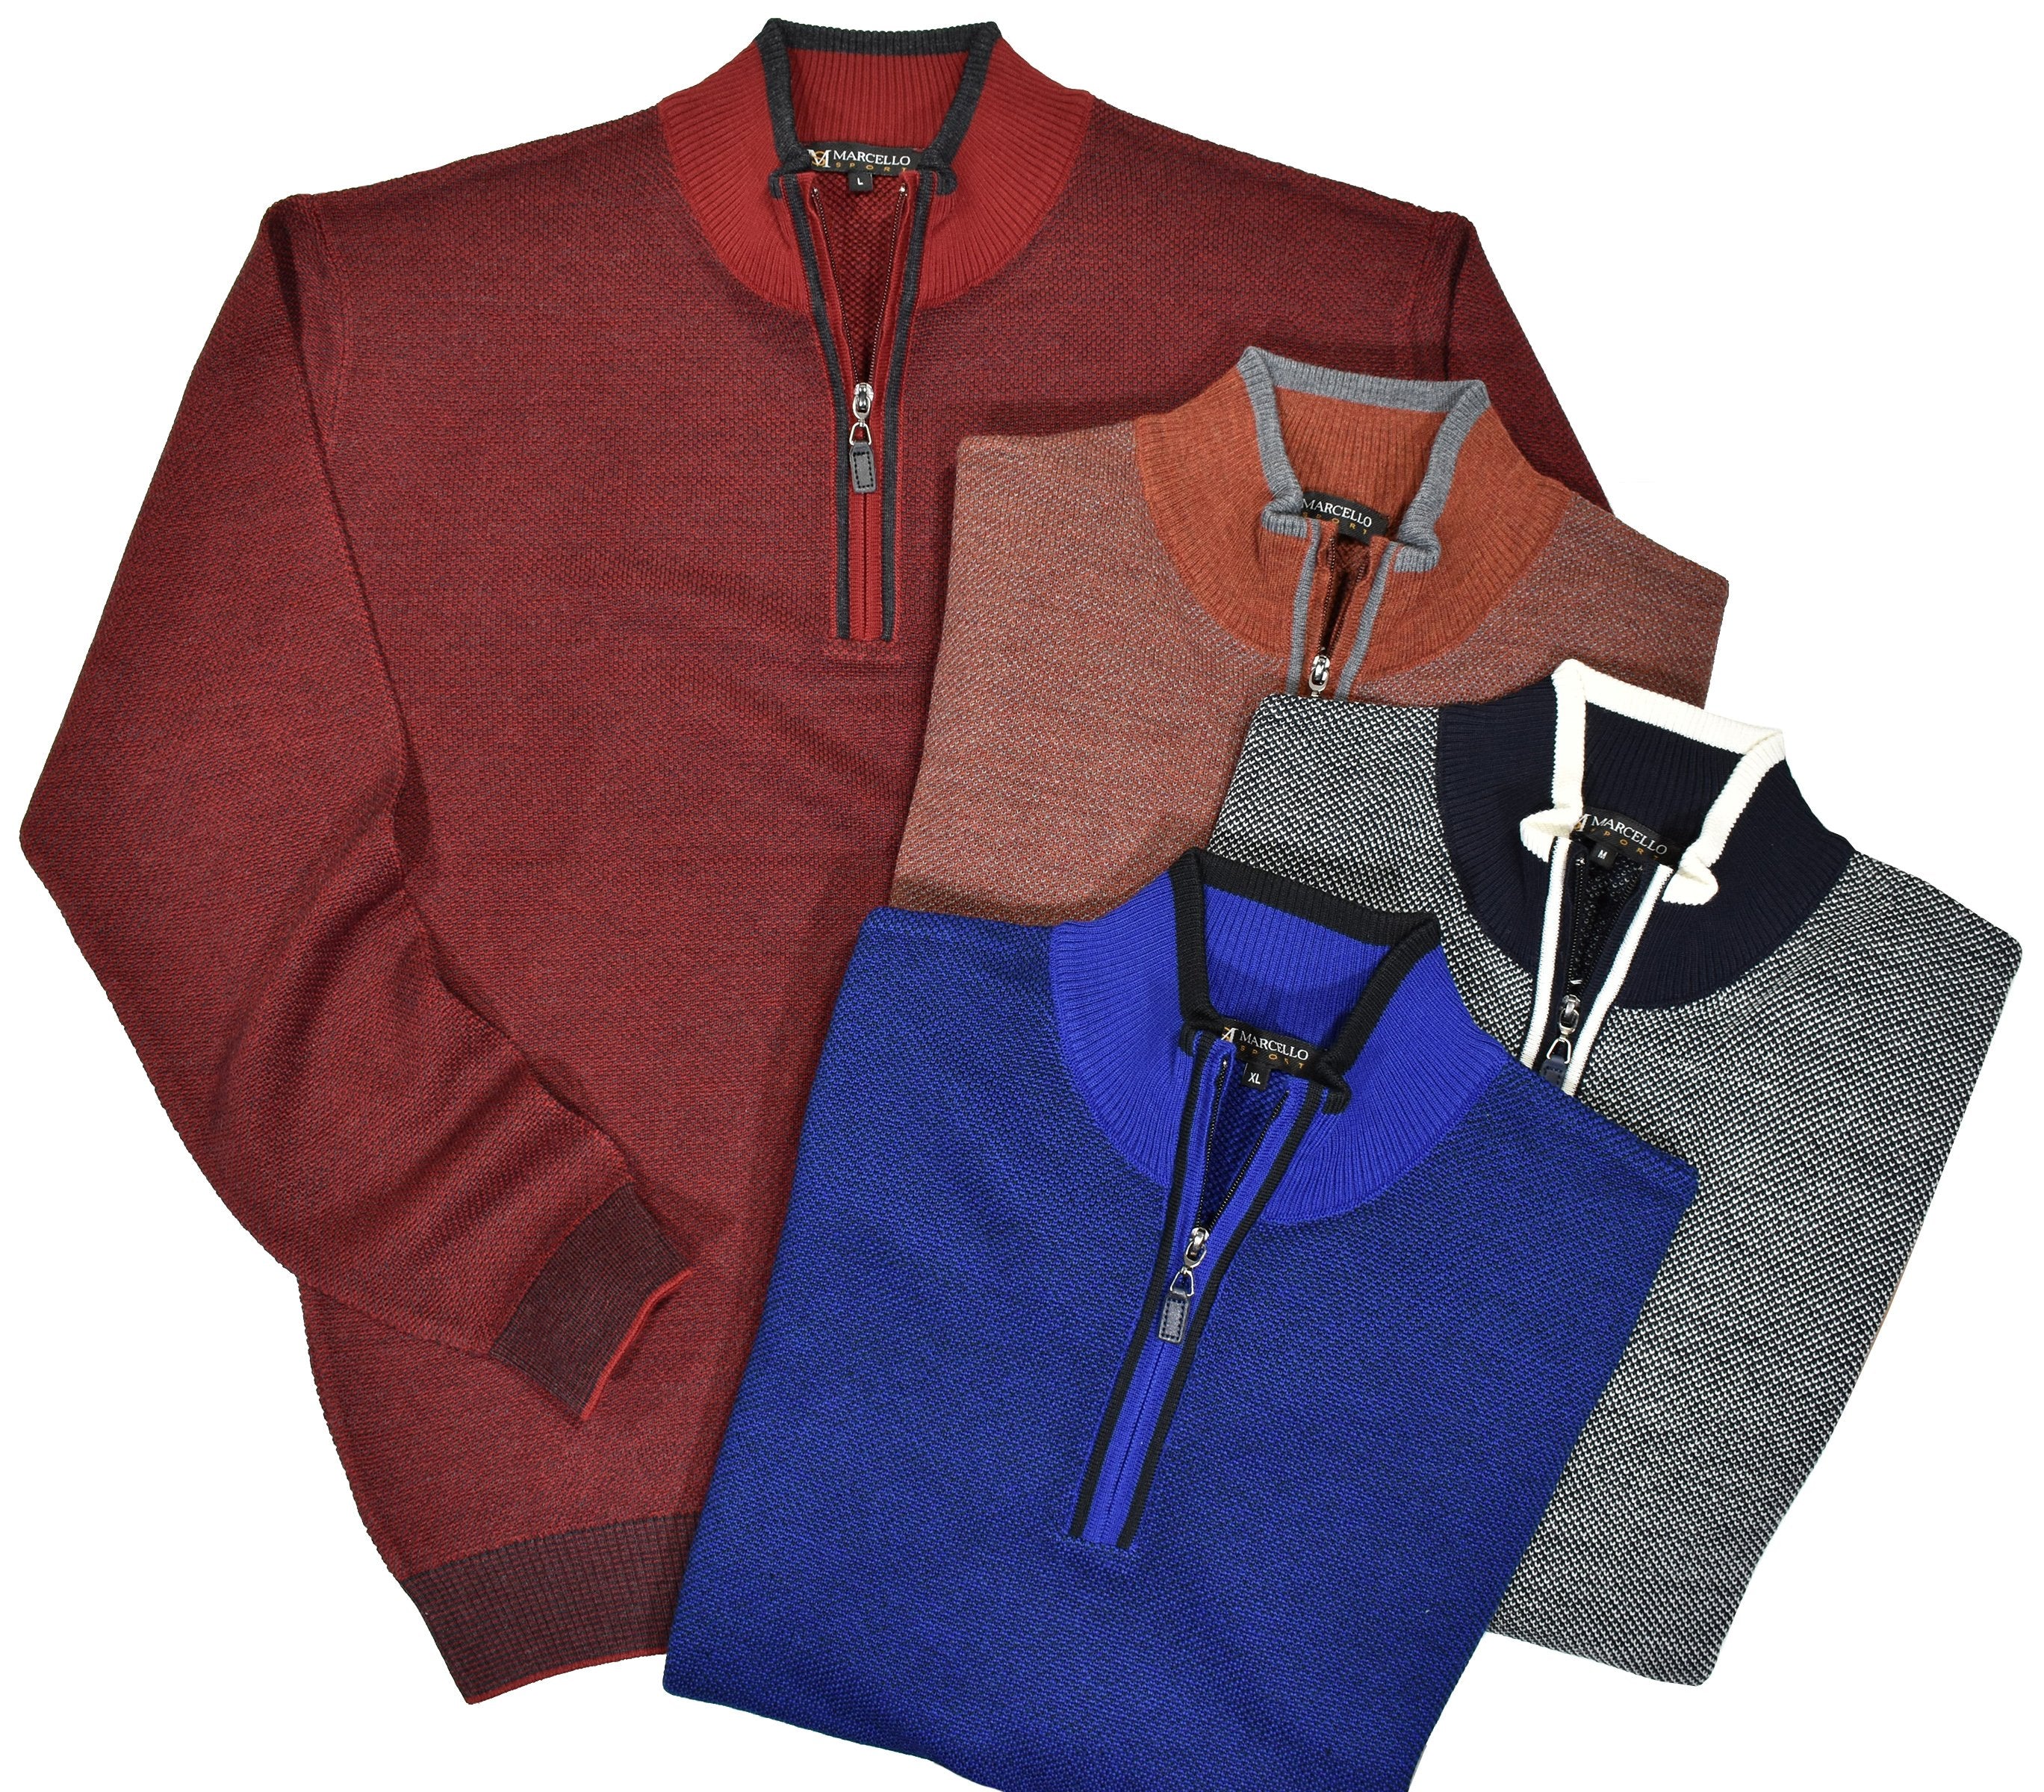 A staple for every man, our finely knitted quarter zips are perfect for dress or casual occasions. Fine two color yarn knitted together and contrast stitch work add style. Classic fit, Italian merino wool blend.